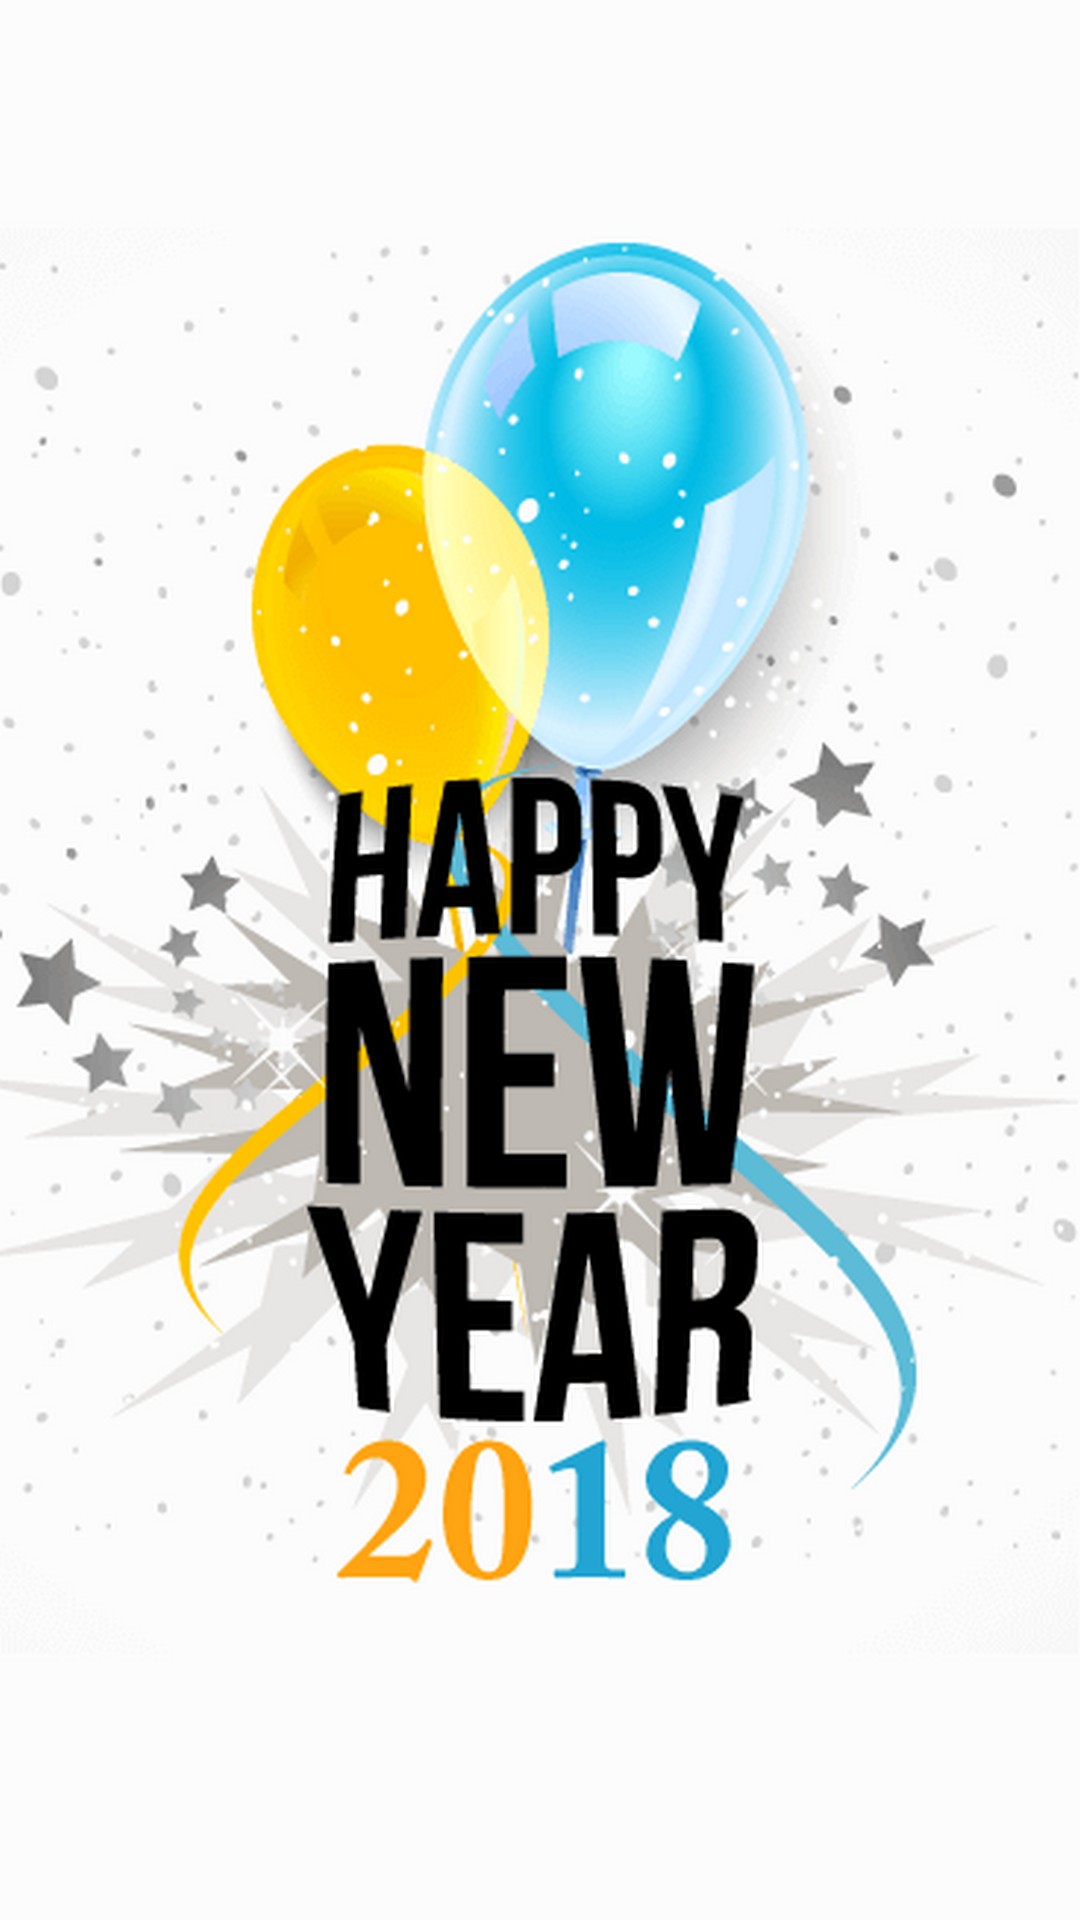 Happy New Year 2018 iPhone Wallpaper - 2018 iPhone Wallpapers